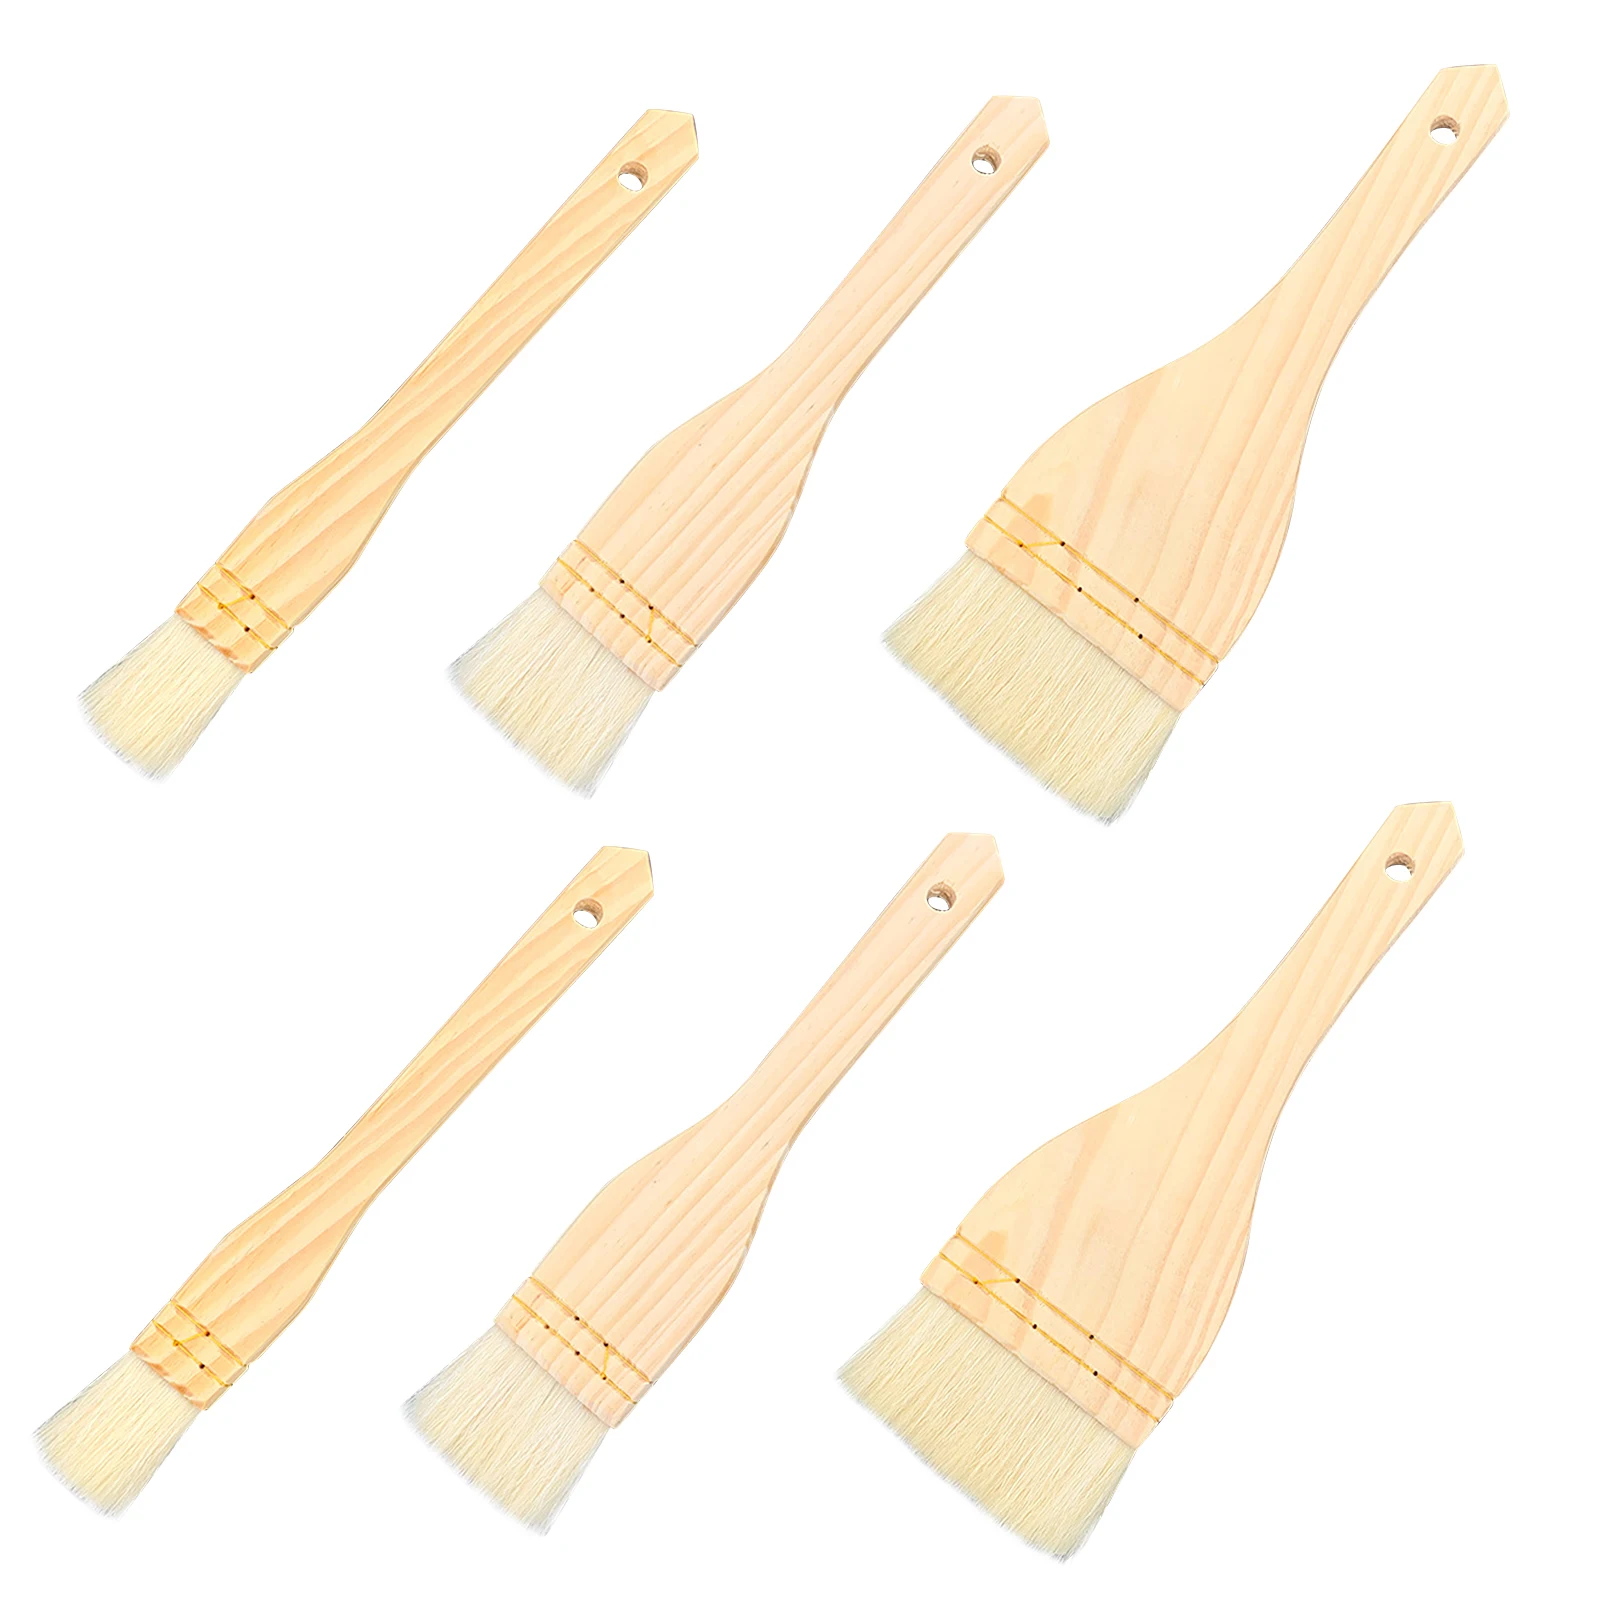 

6pcs Wash Assorted Size Background With Handle Artist Painting For Watercolor Ceramic Pottery Flat Hake Brush Gift Professional